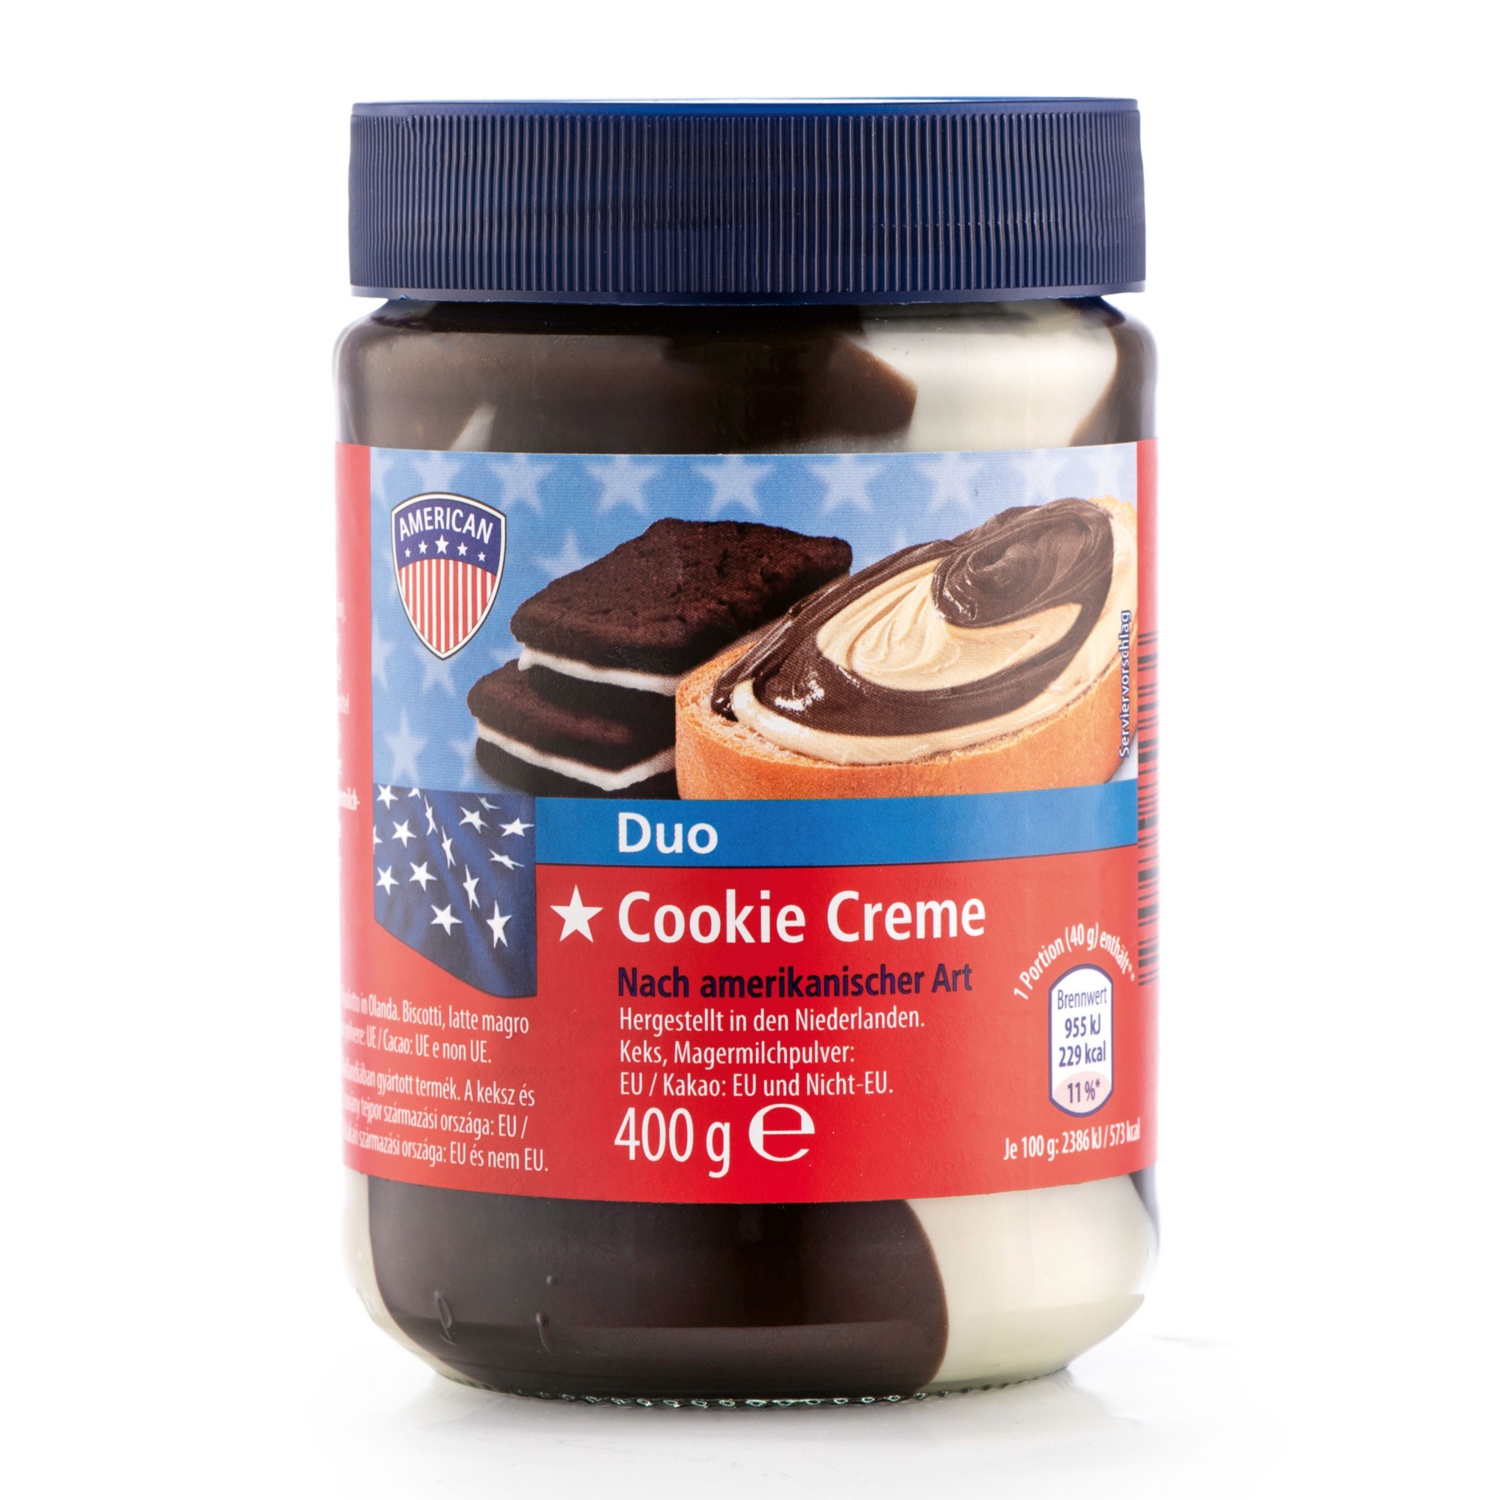 AMERICAN Cookie Creme, Duocreme